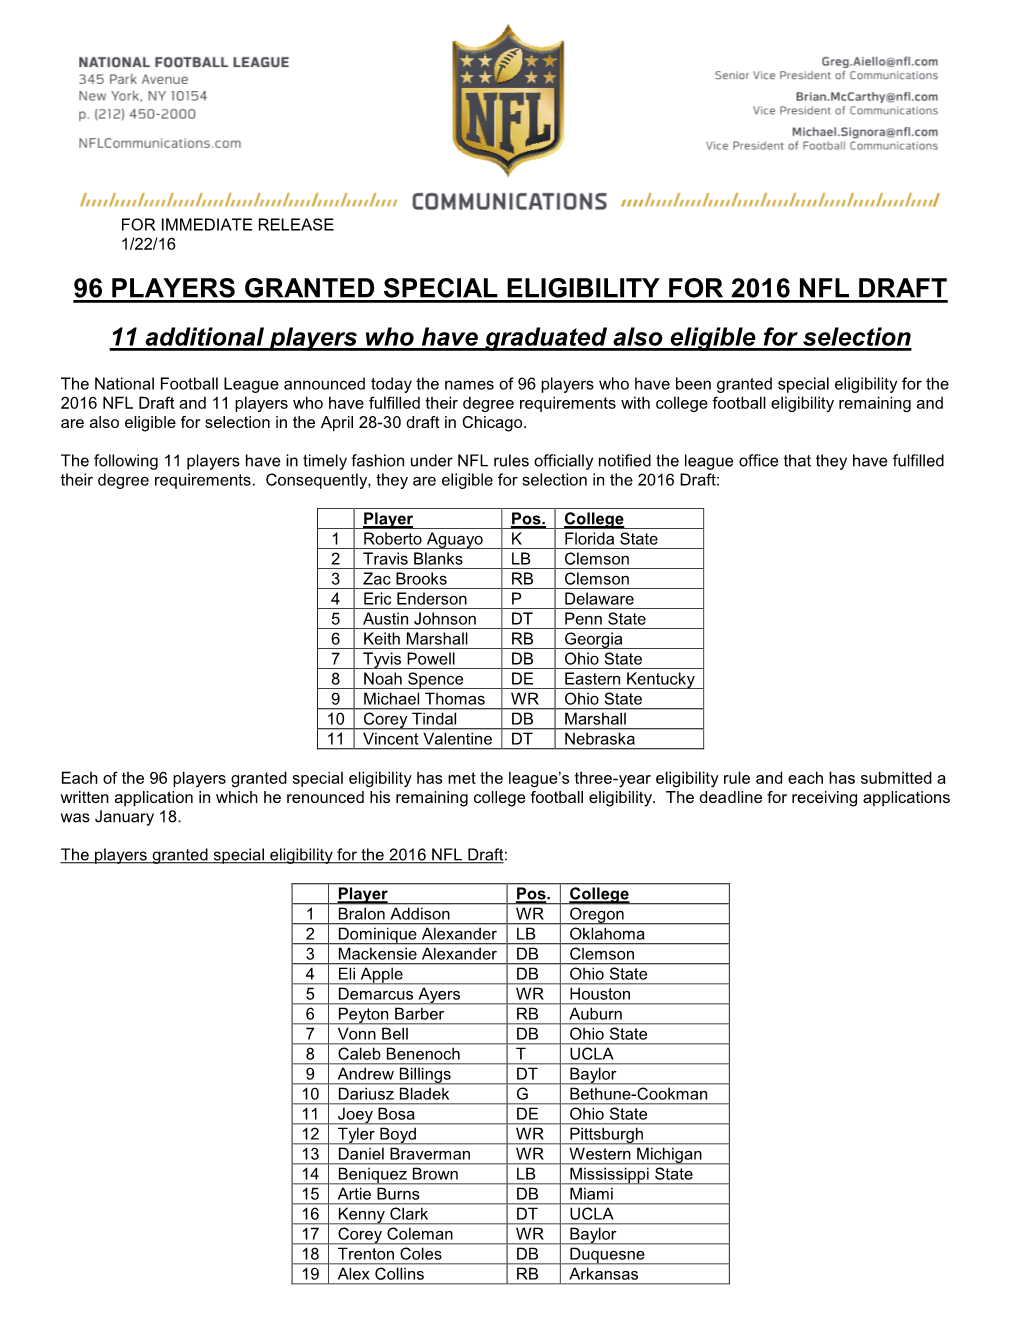 96 Players Granted Special Eligibility for 2016 Nfl Draft